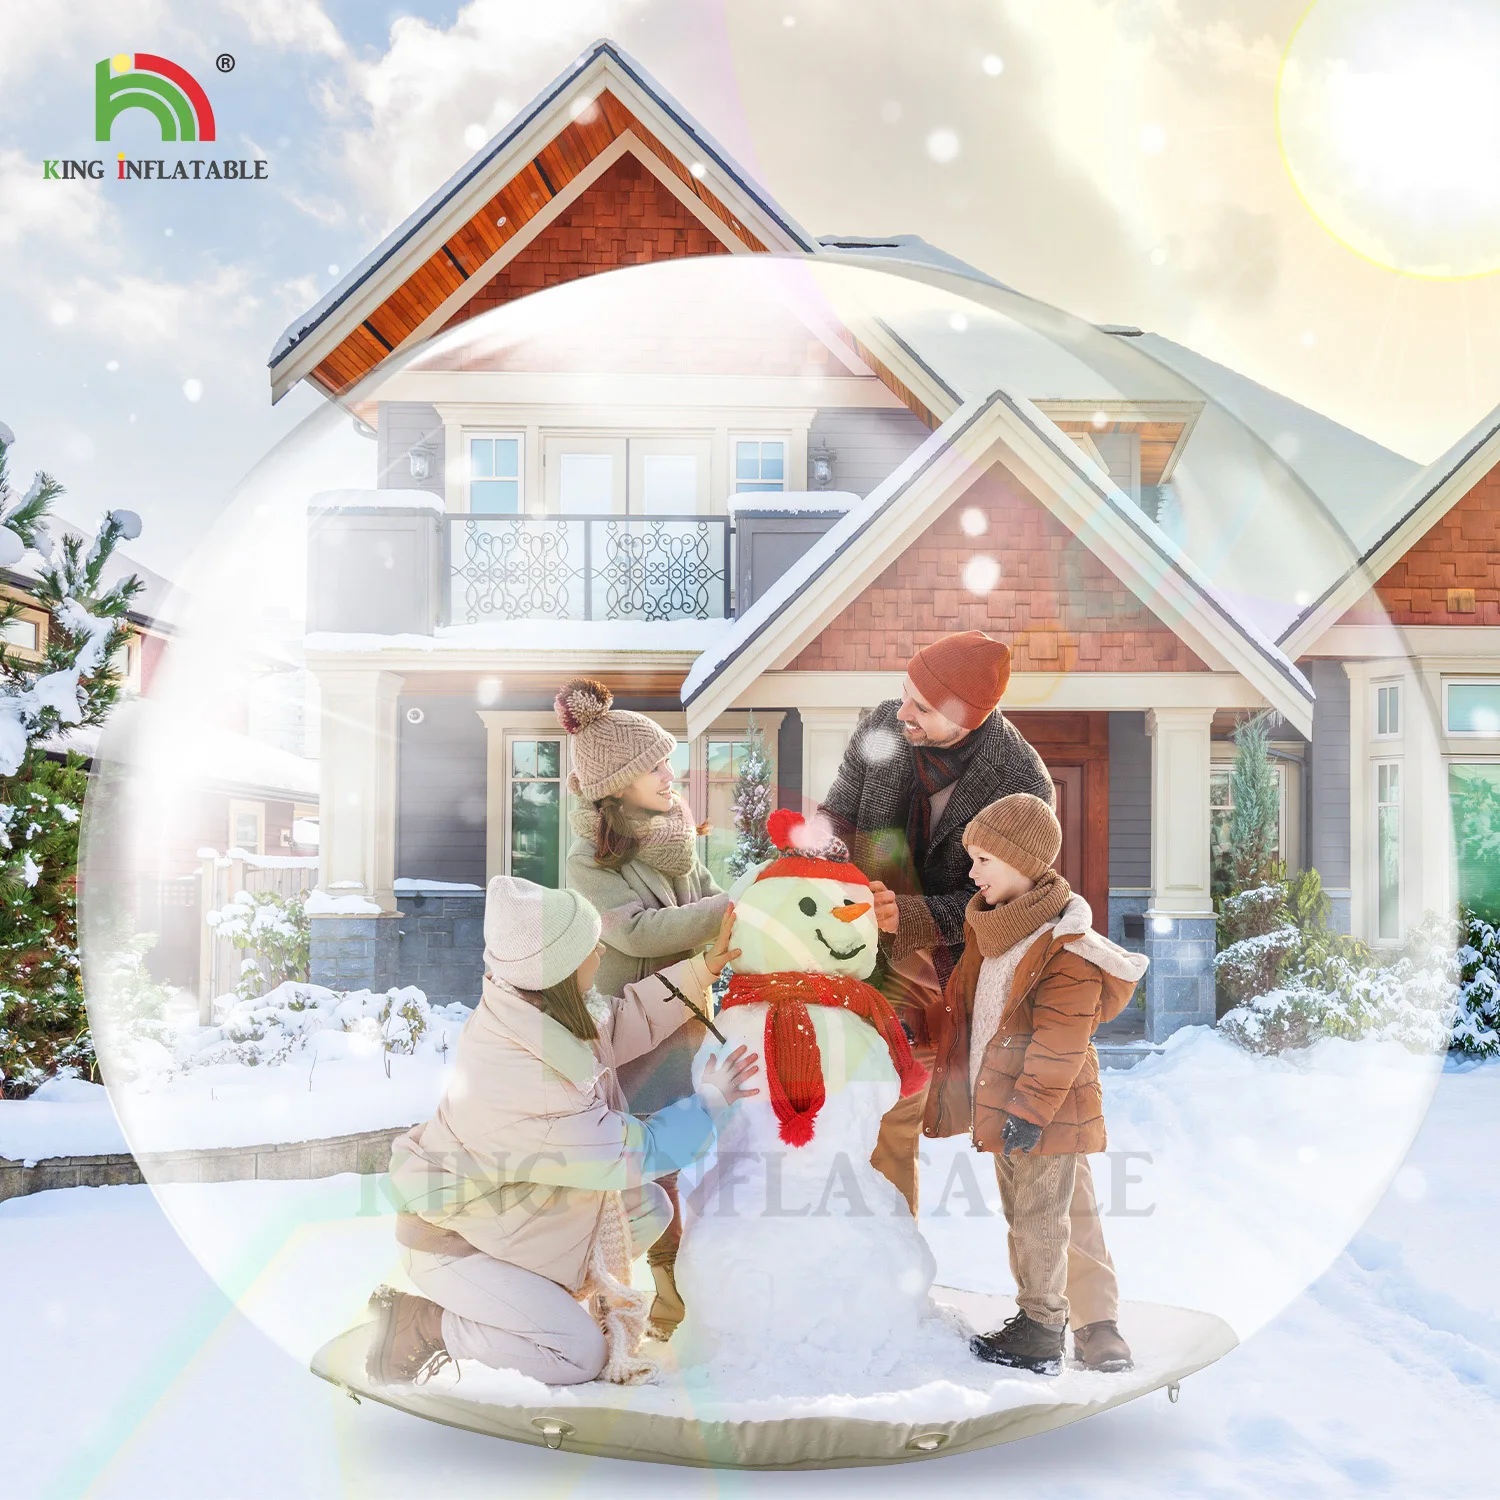 10ft/3m PVC Transparent Bubble Tent Giant Inflatable Snowball Christmas Snow Globe Dome Xmas Outdoor Decoration With Blower promotion christmas inflatable snow globe for sale giant pvc bubble room for christmas inflatables phtot booth ball